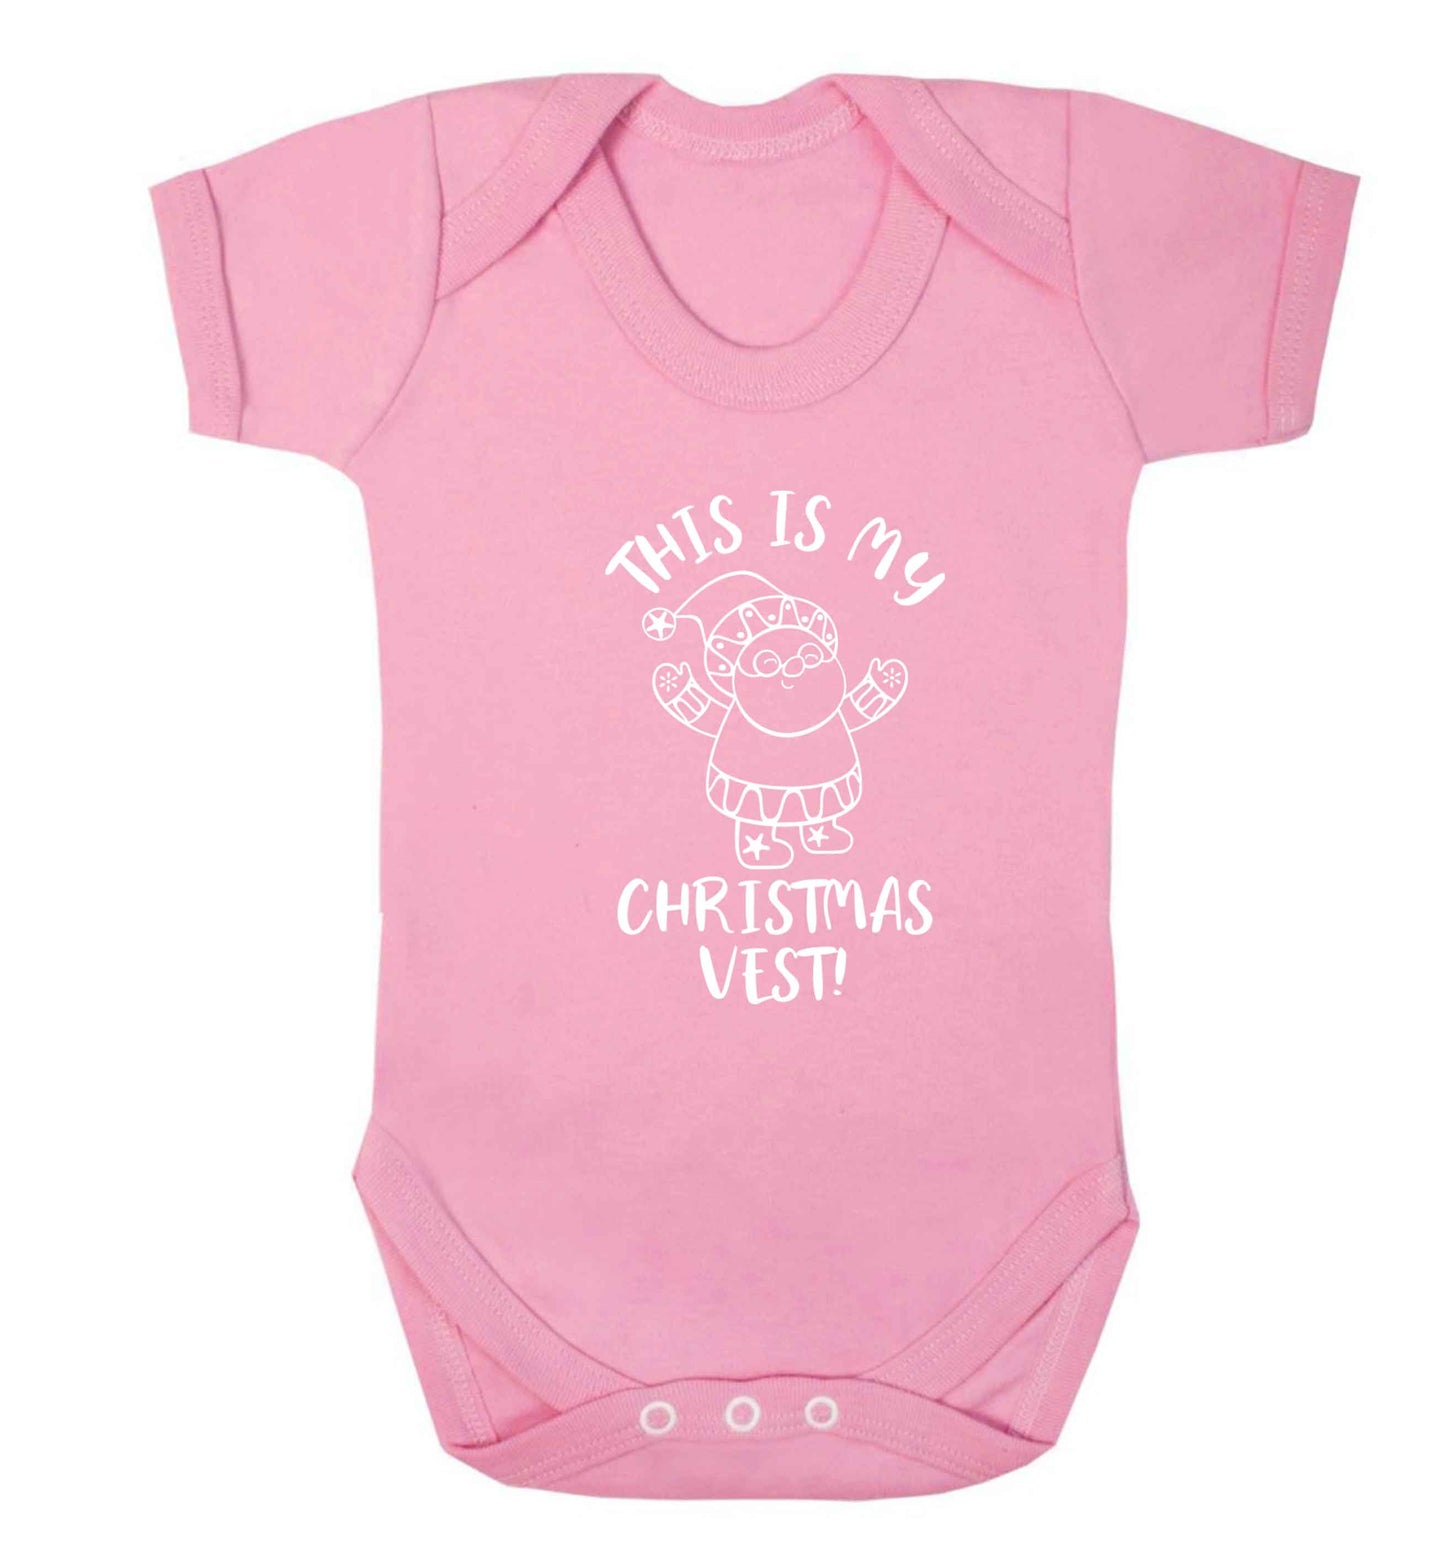 This is my Christmas vest Baby Vest pale pink 18-24 months